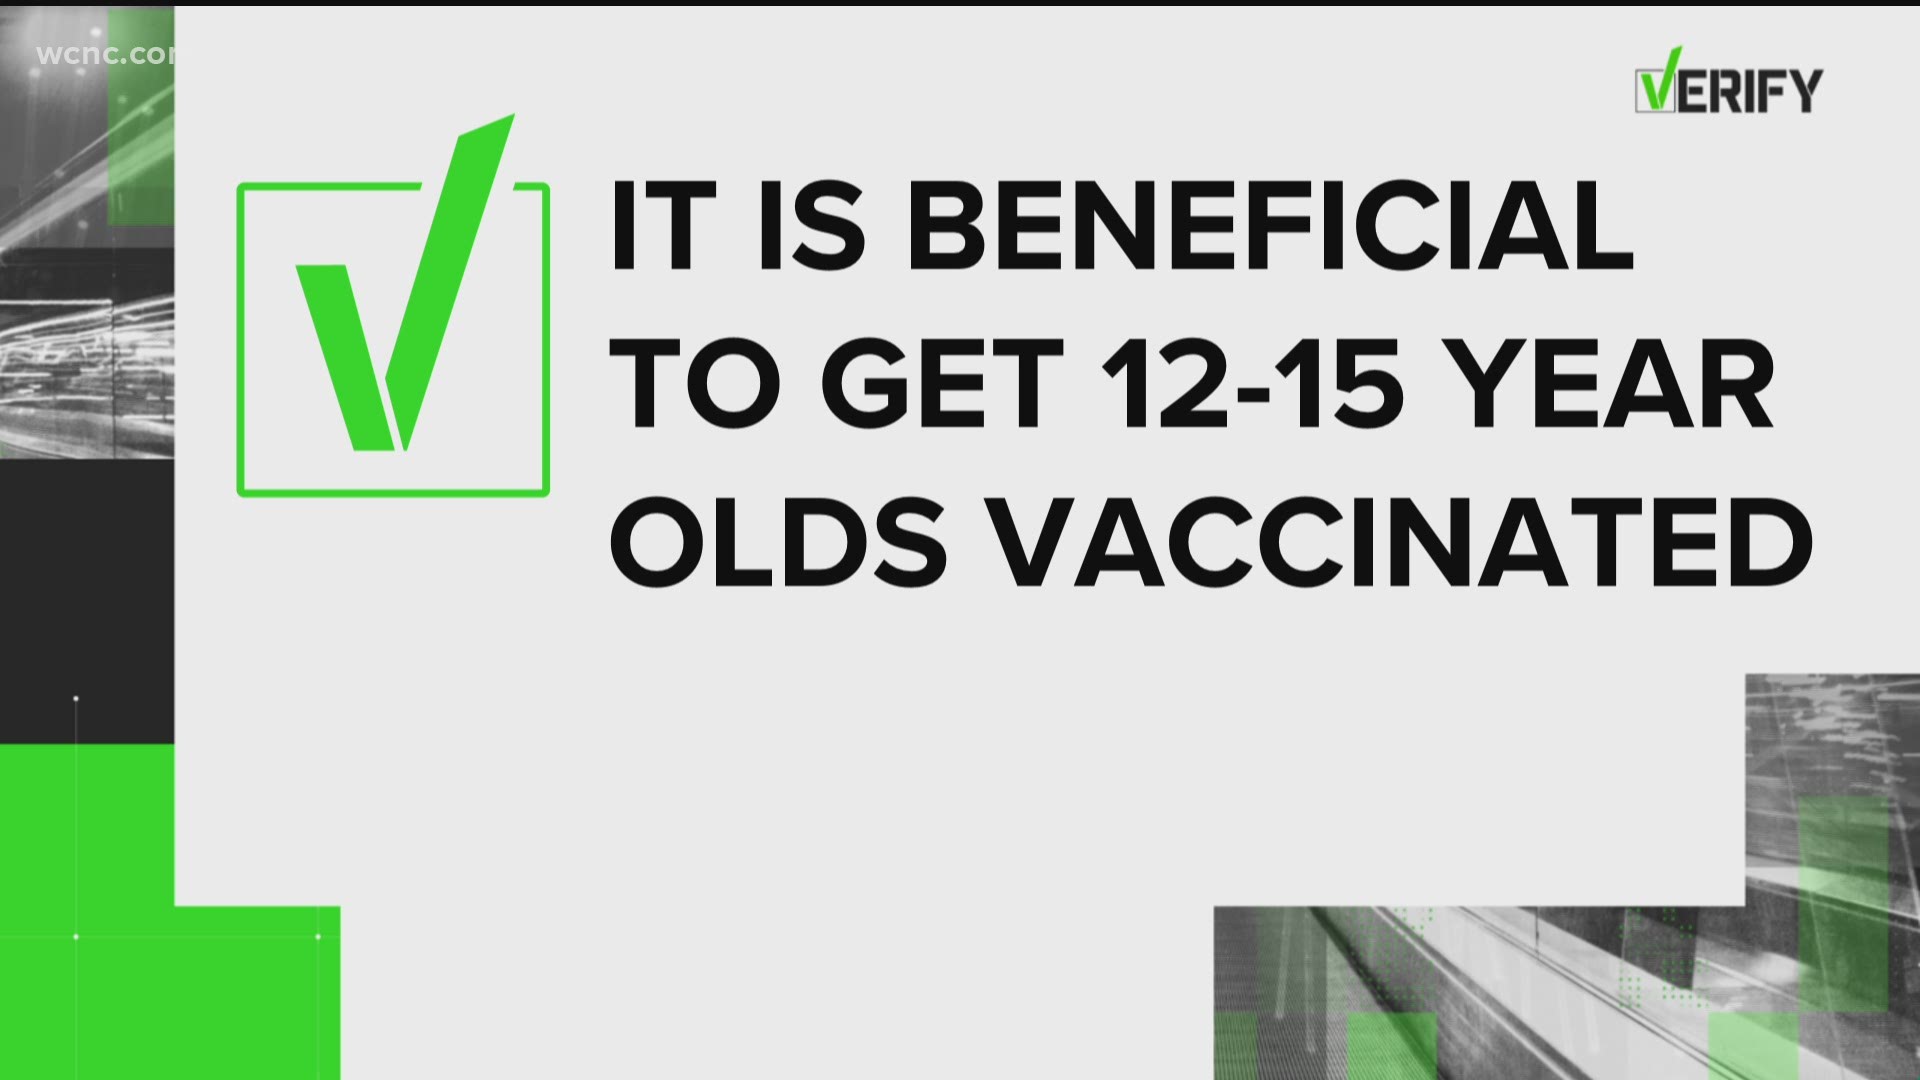 The FDA announced Monday it will expand emergency use of the Pfizer COVID-19 vaccine for kids age 12-15. Here's what you need to know about the approval.